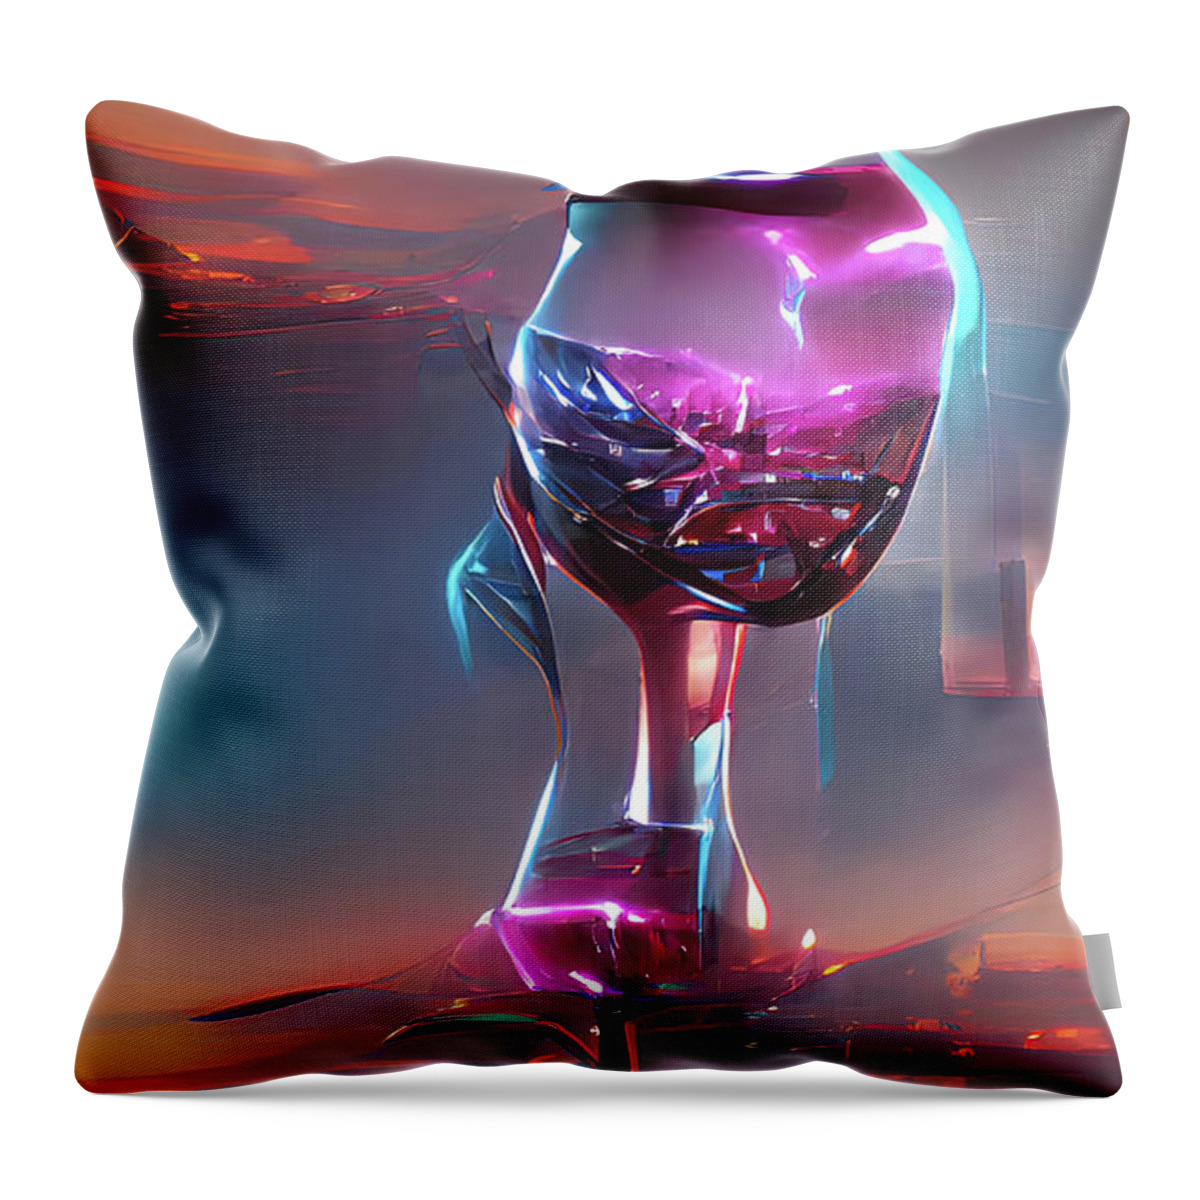 Wine Glasses Throw Pillow featuring the digital art Merlot by The Glass AI by Floyd Snyder